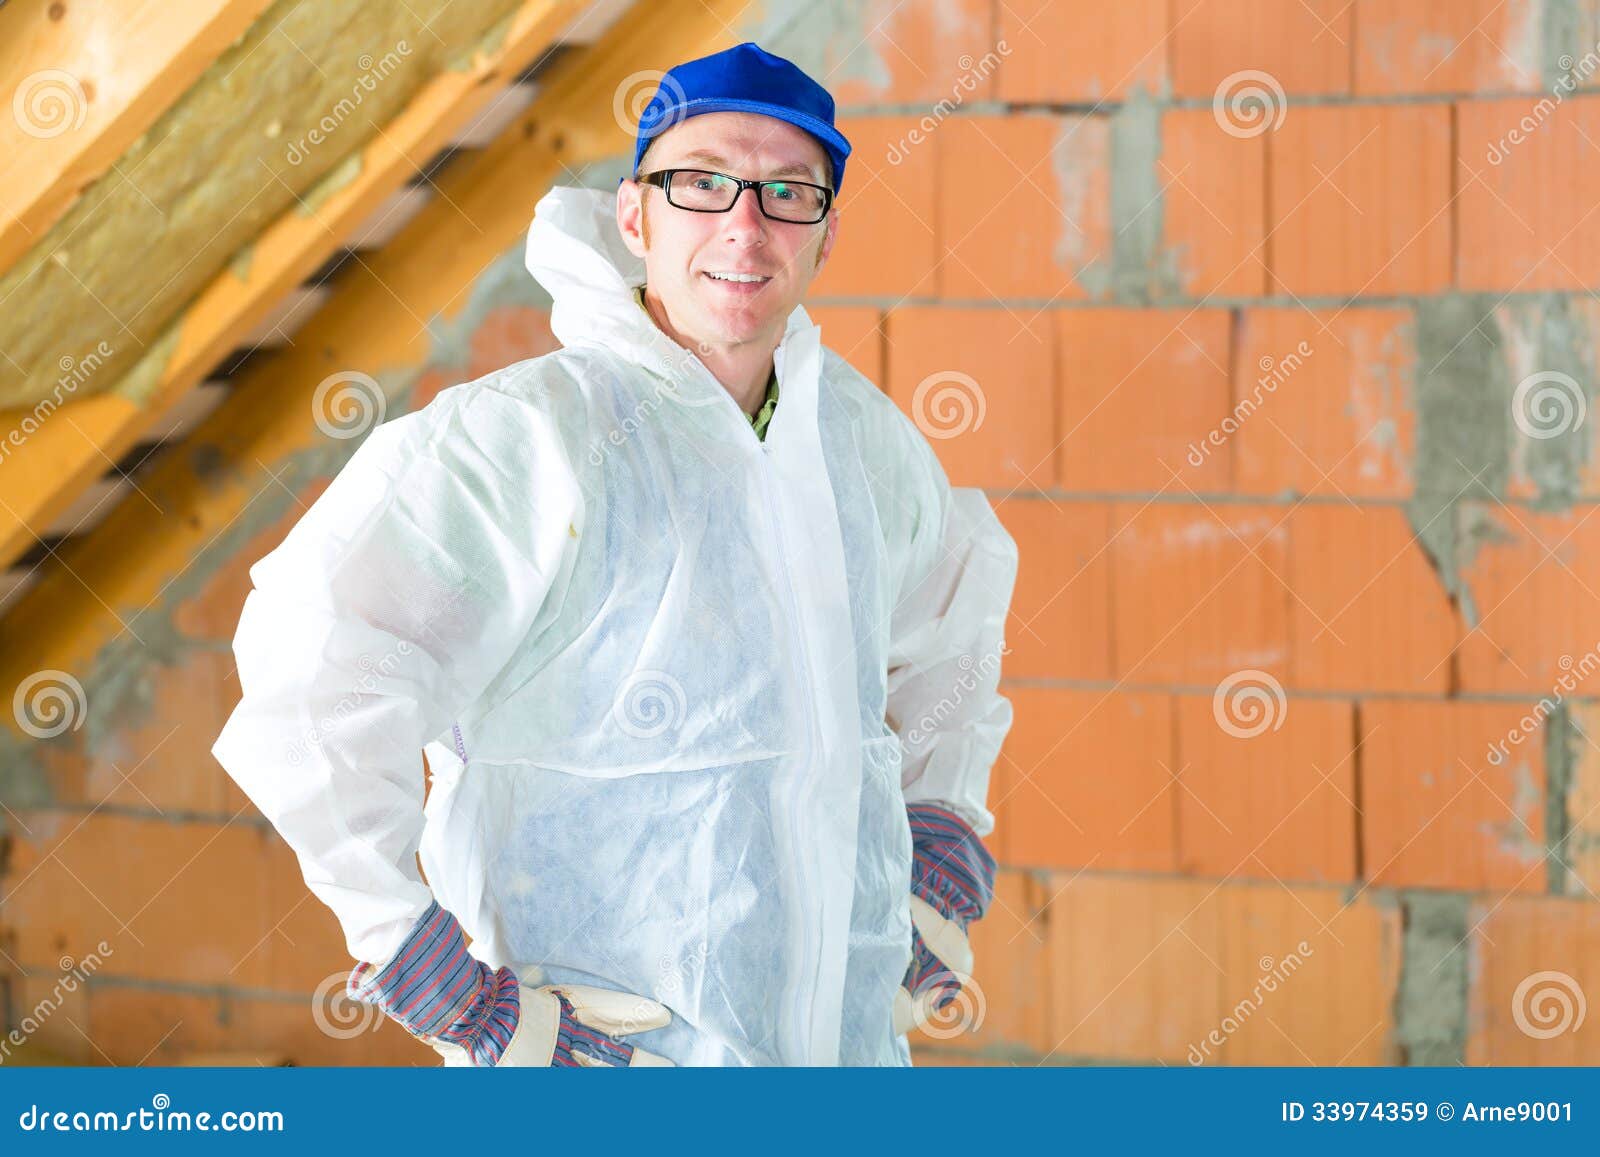 worker attaching thermal insulation to roof